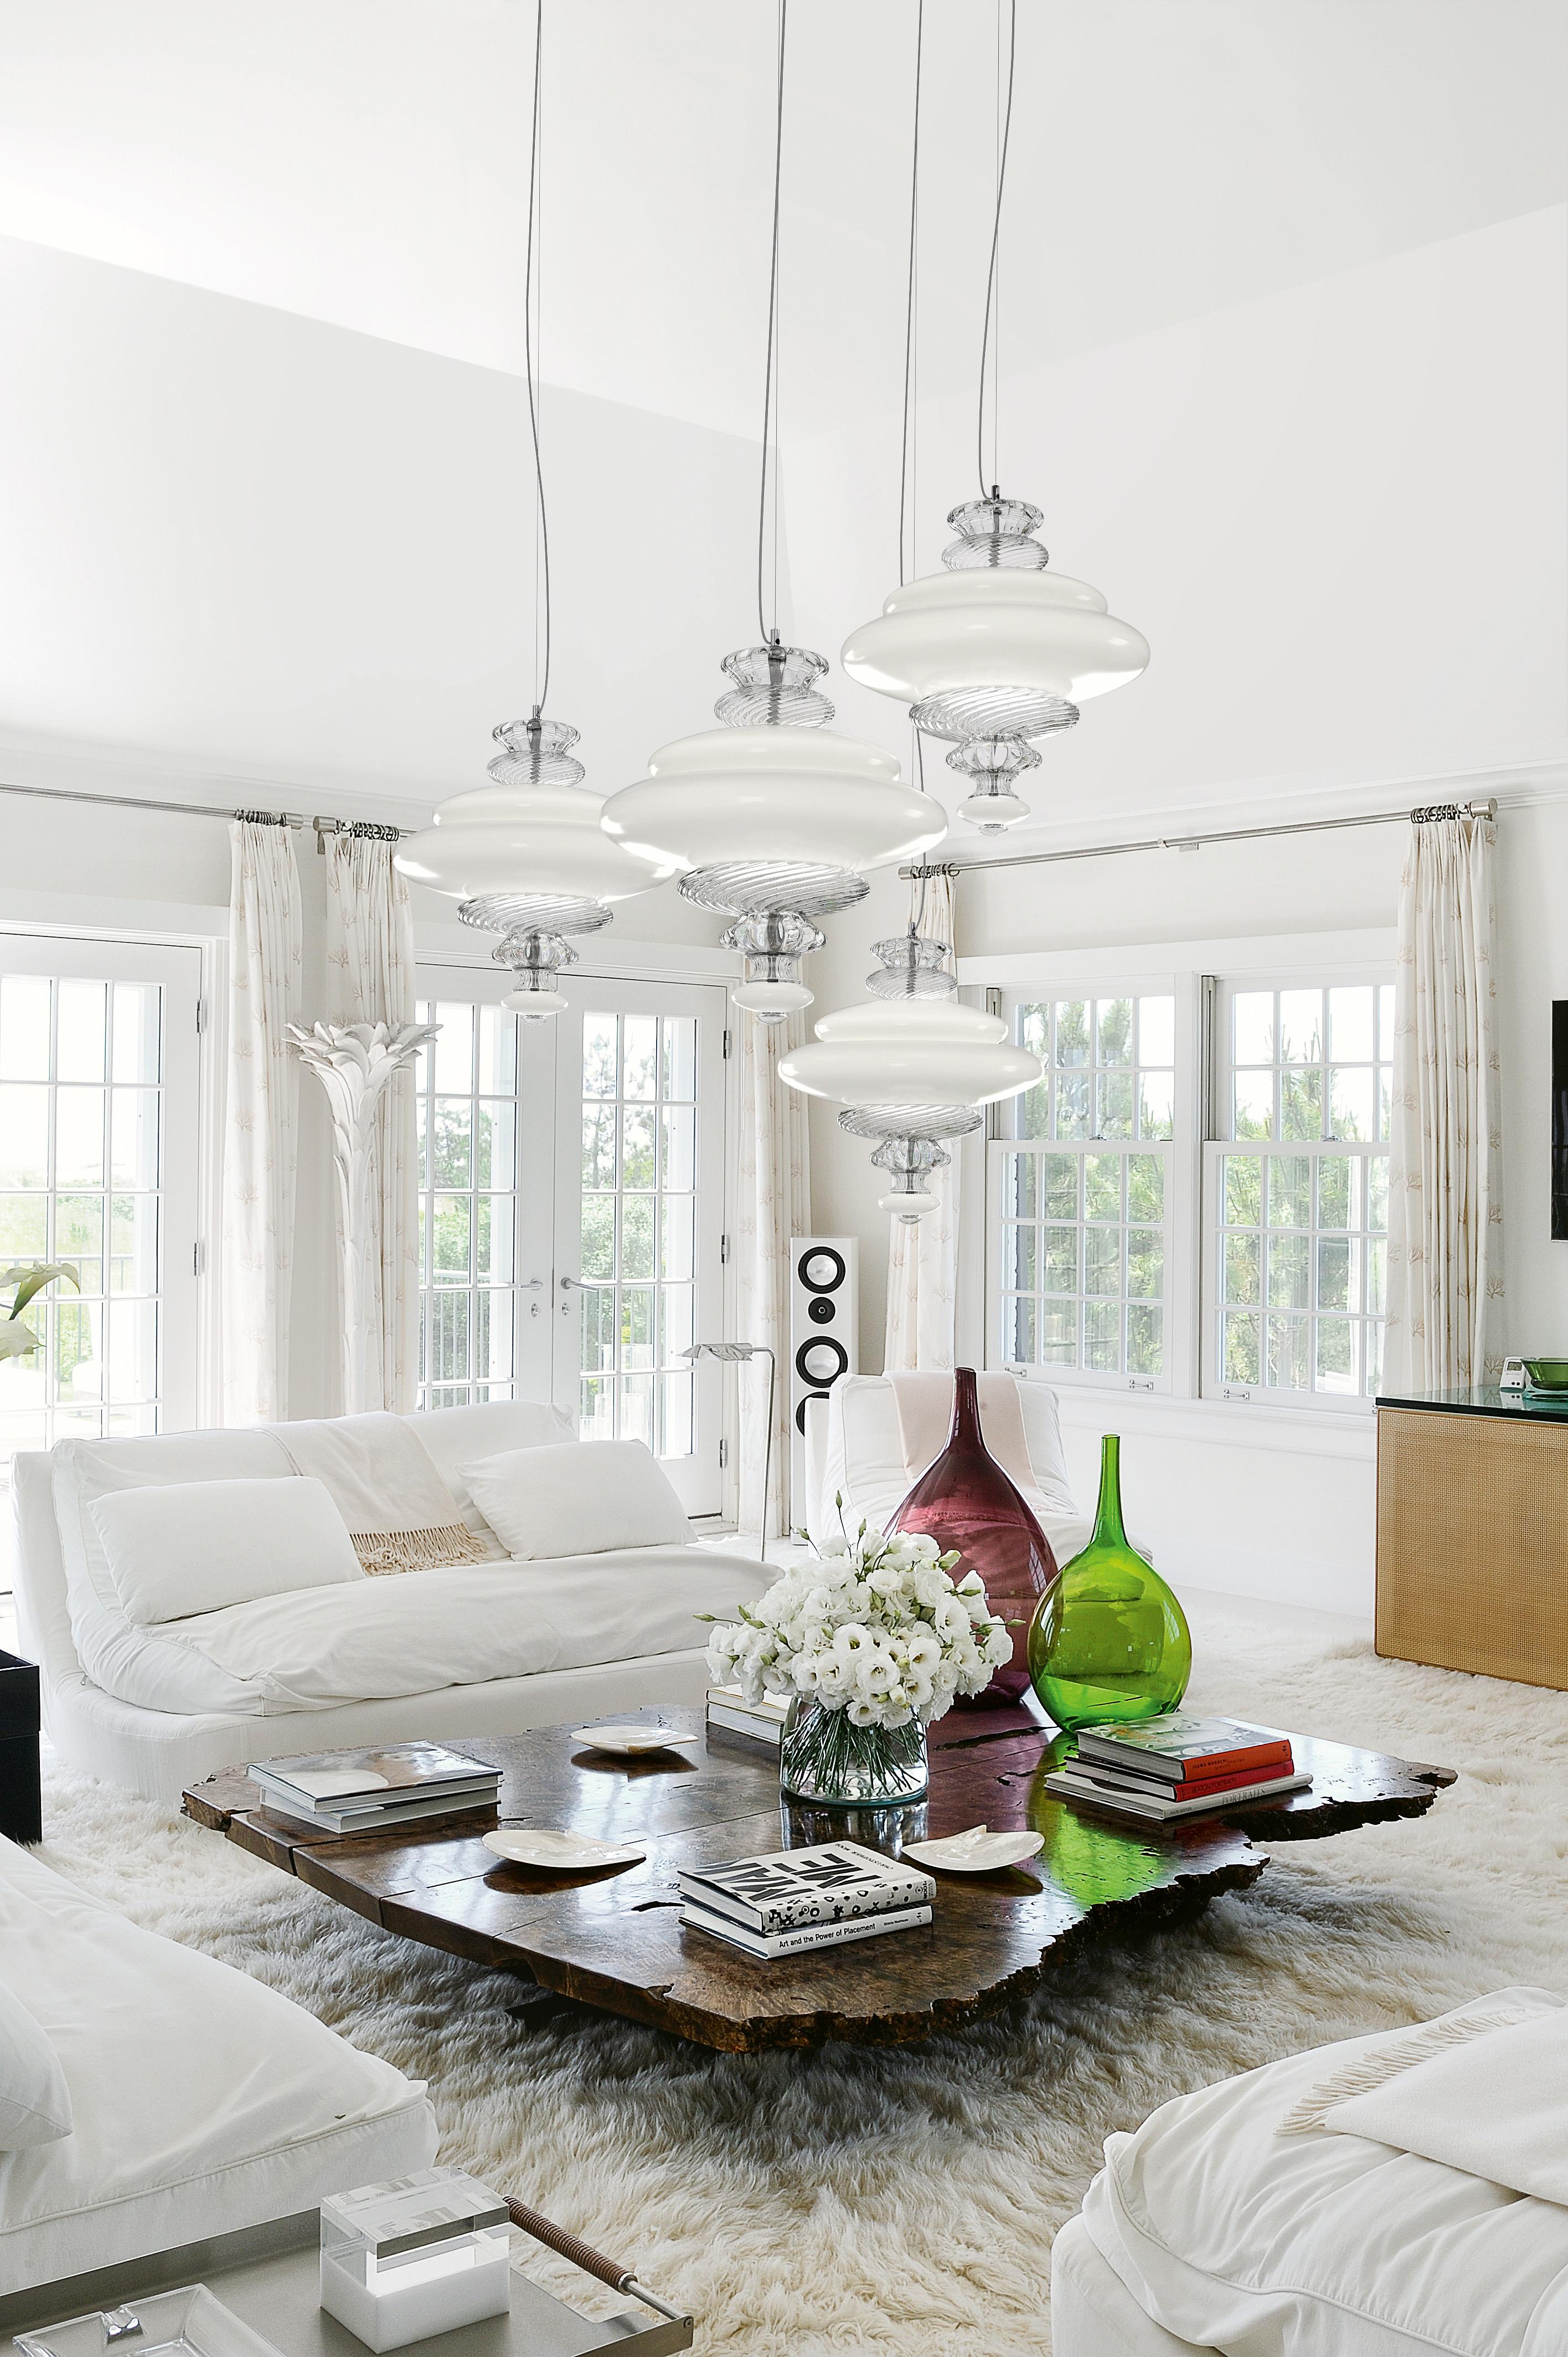 Blown Glass Pigalle 5692 Suspension Lamp in White/Crystal Glass, by Barovier&Toso